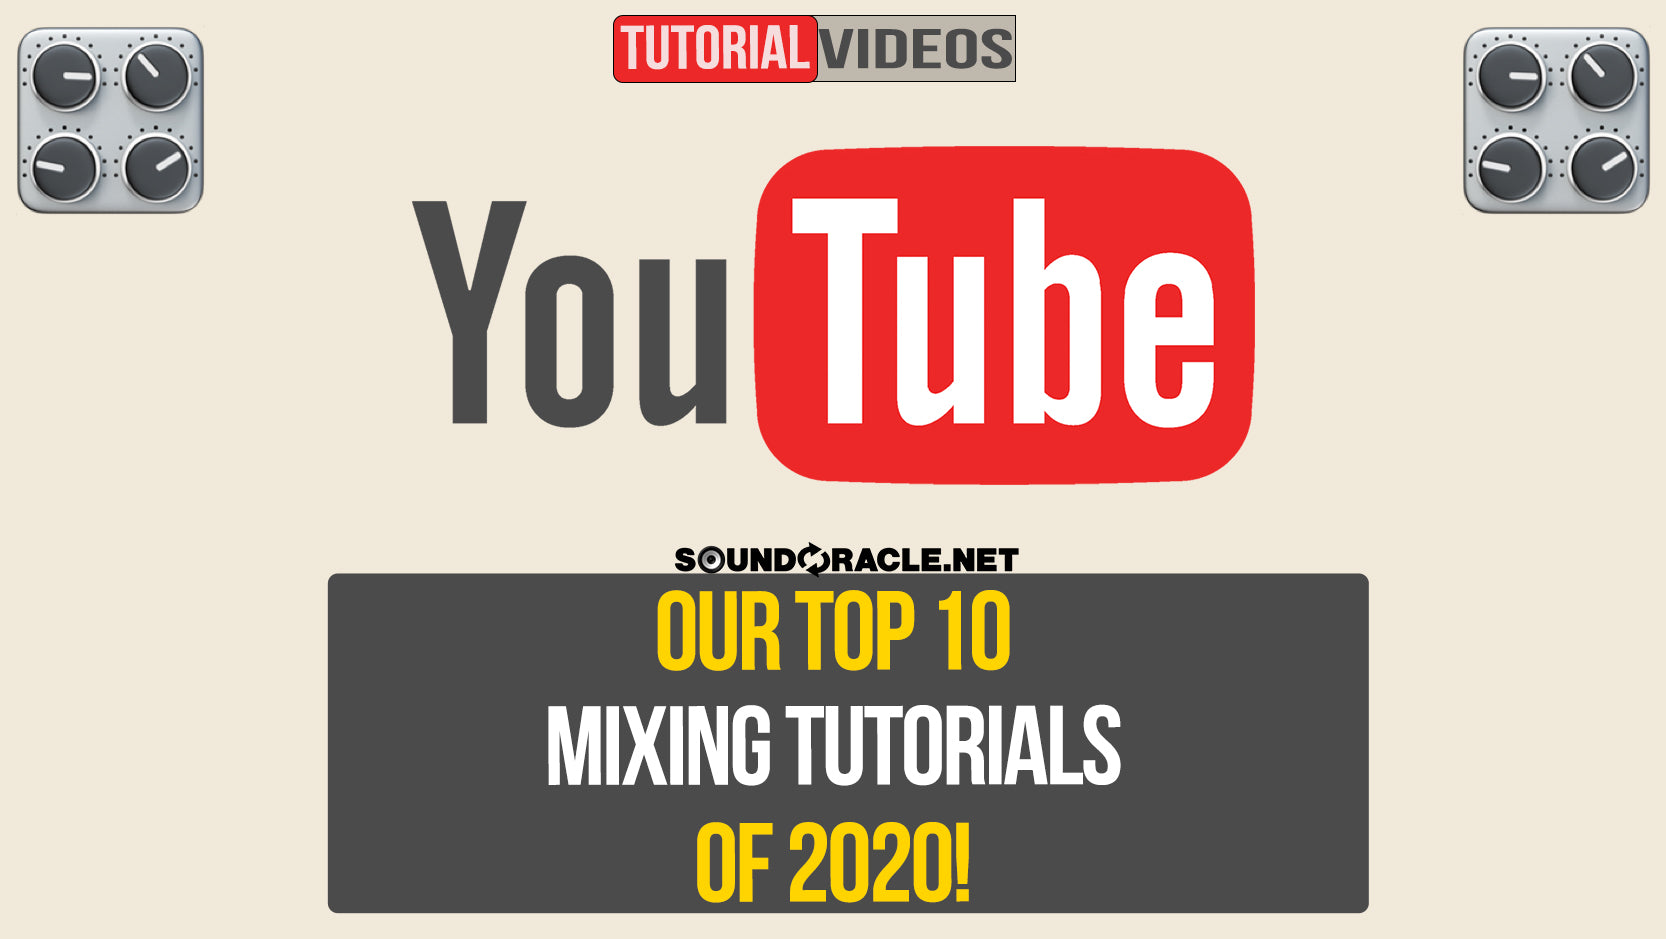 Our Top 10 Mixing Tutorials Of 2020!